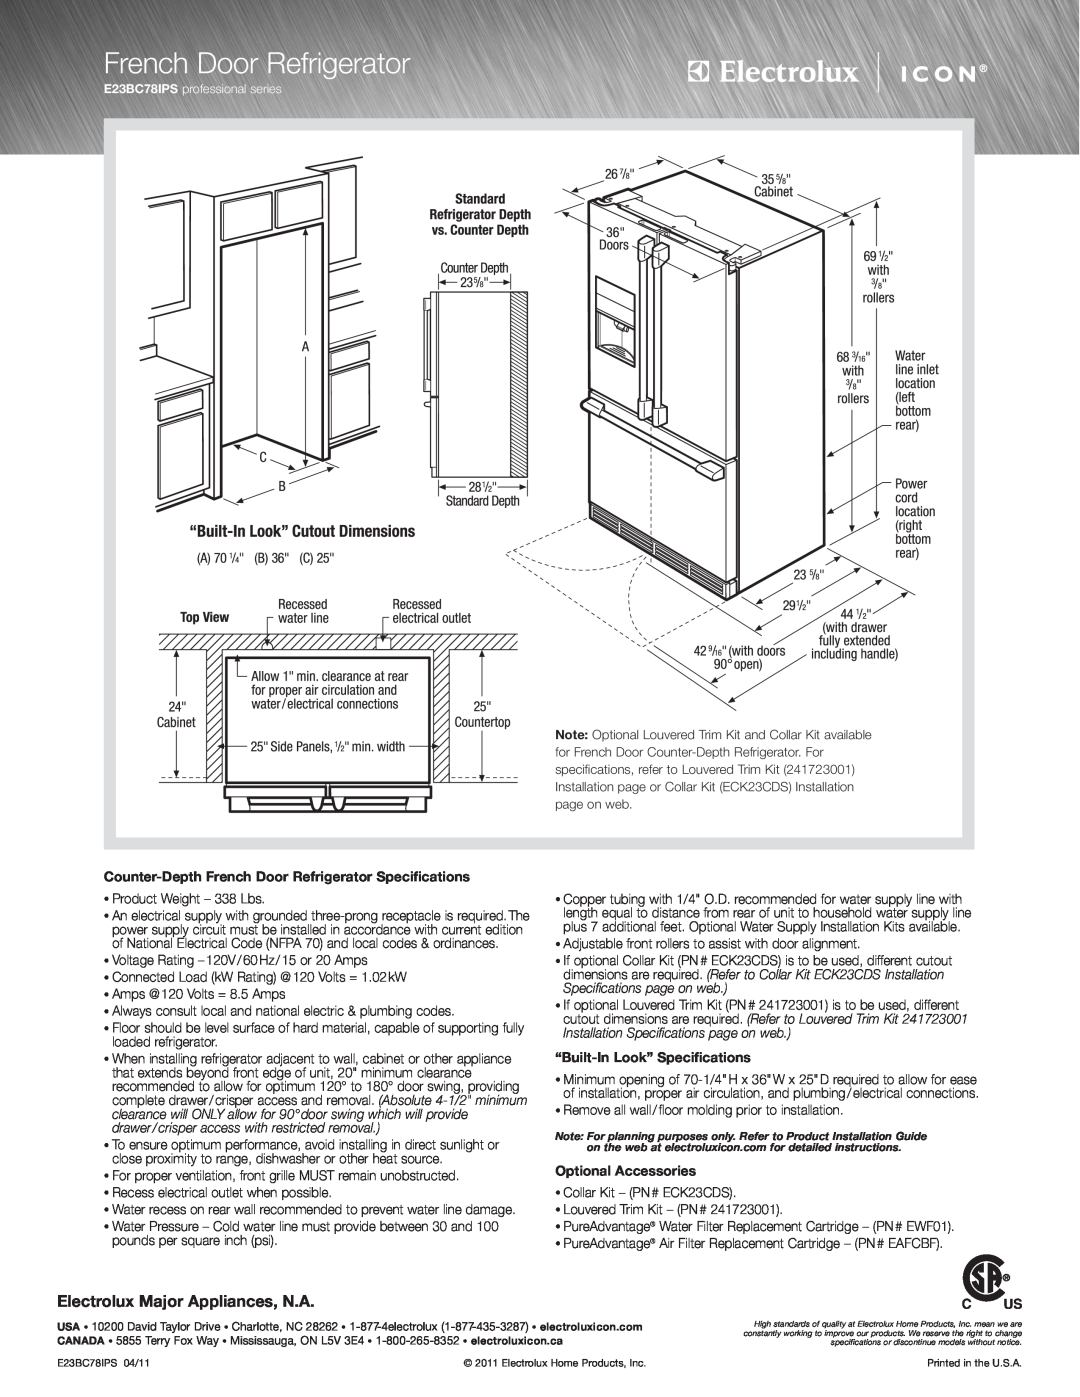 Electrolux E23BC78IPS Electrolux Major Appliances, N.A, French Door Refrigerator, “Built-In Look” Specifications 